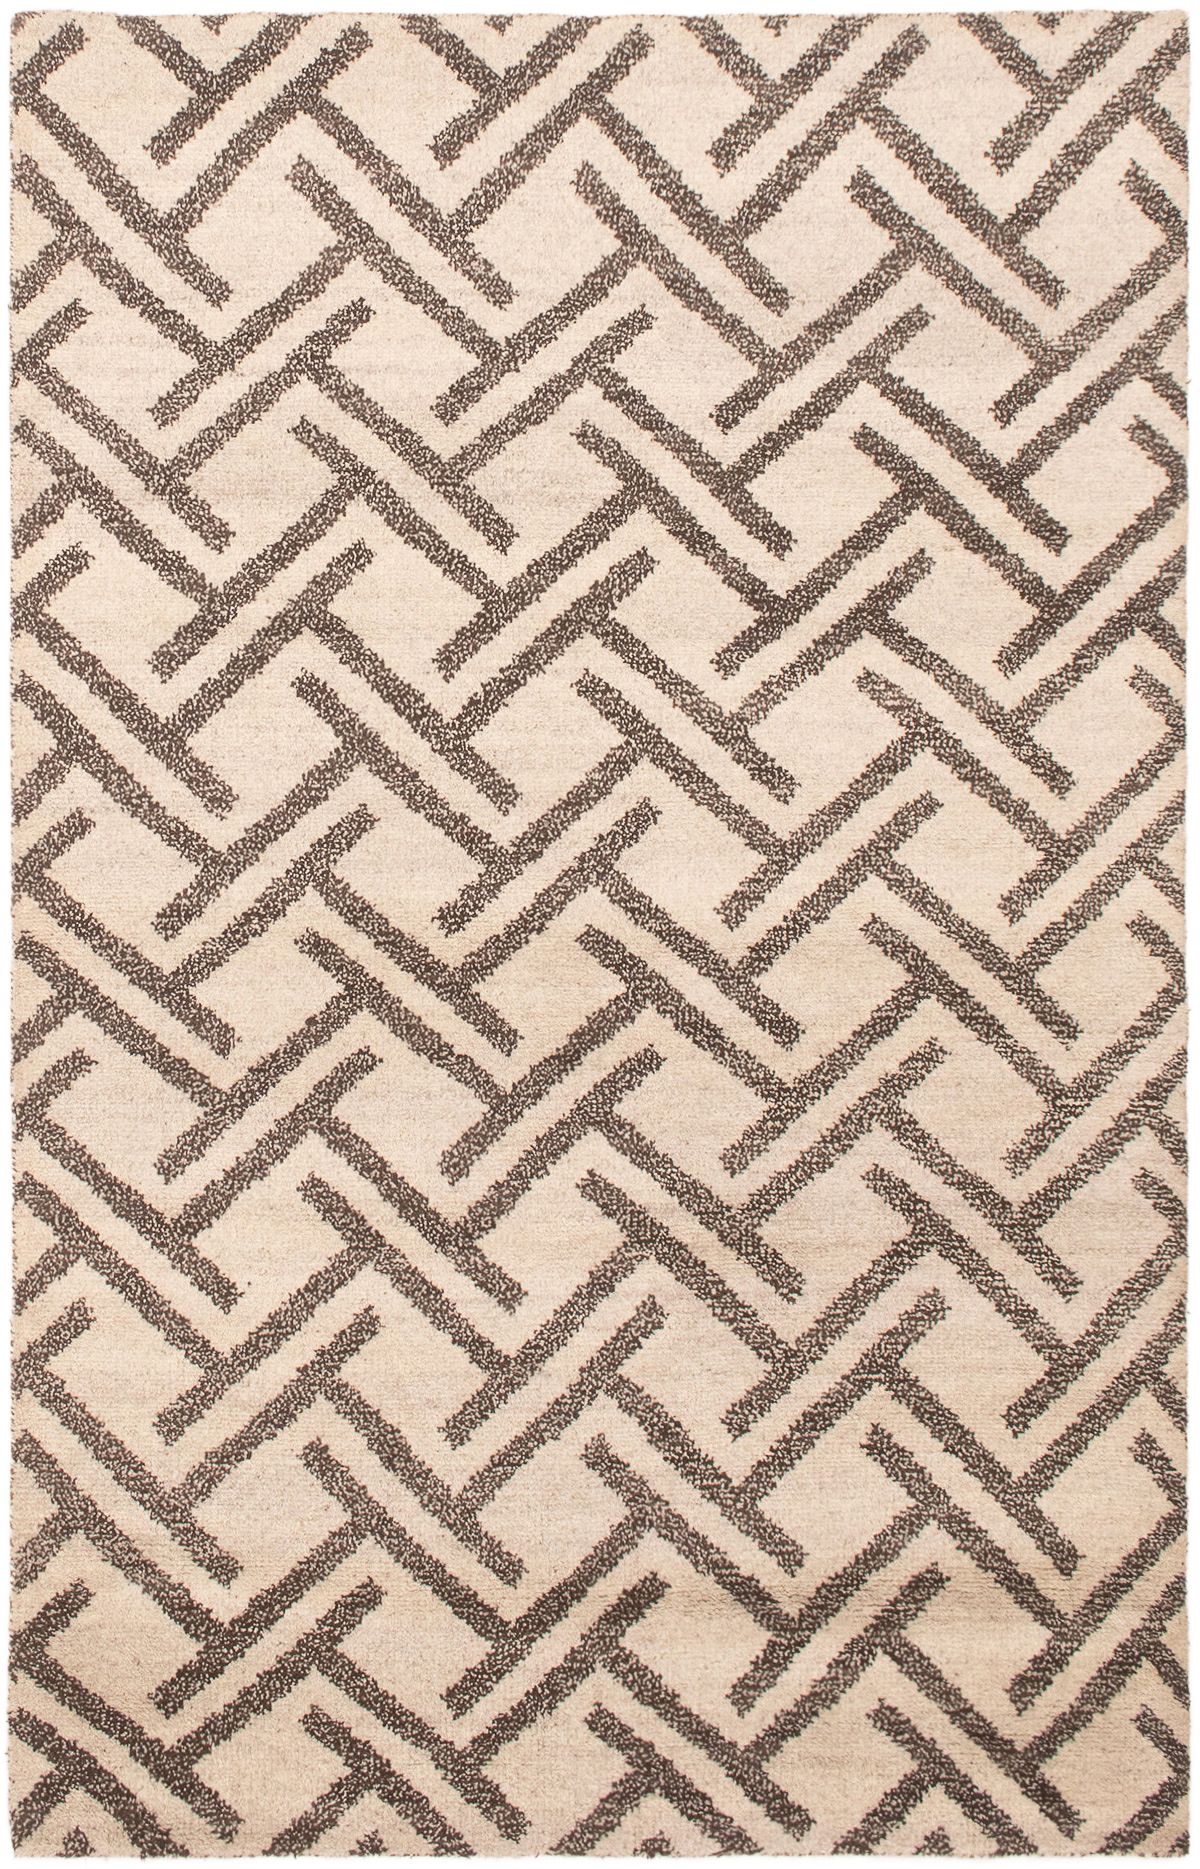 Hand-knotted Tangier Cream Wool Rug 5'2" x 8'2"  Size: 5'2" x 8'2"  